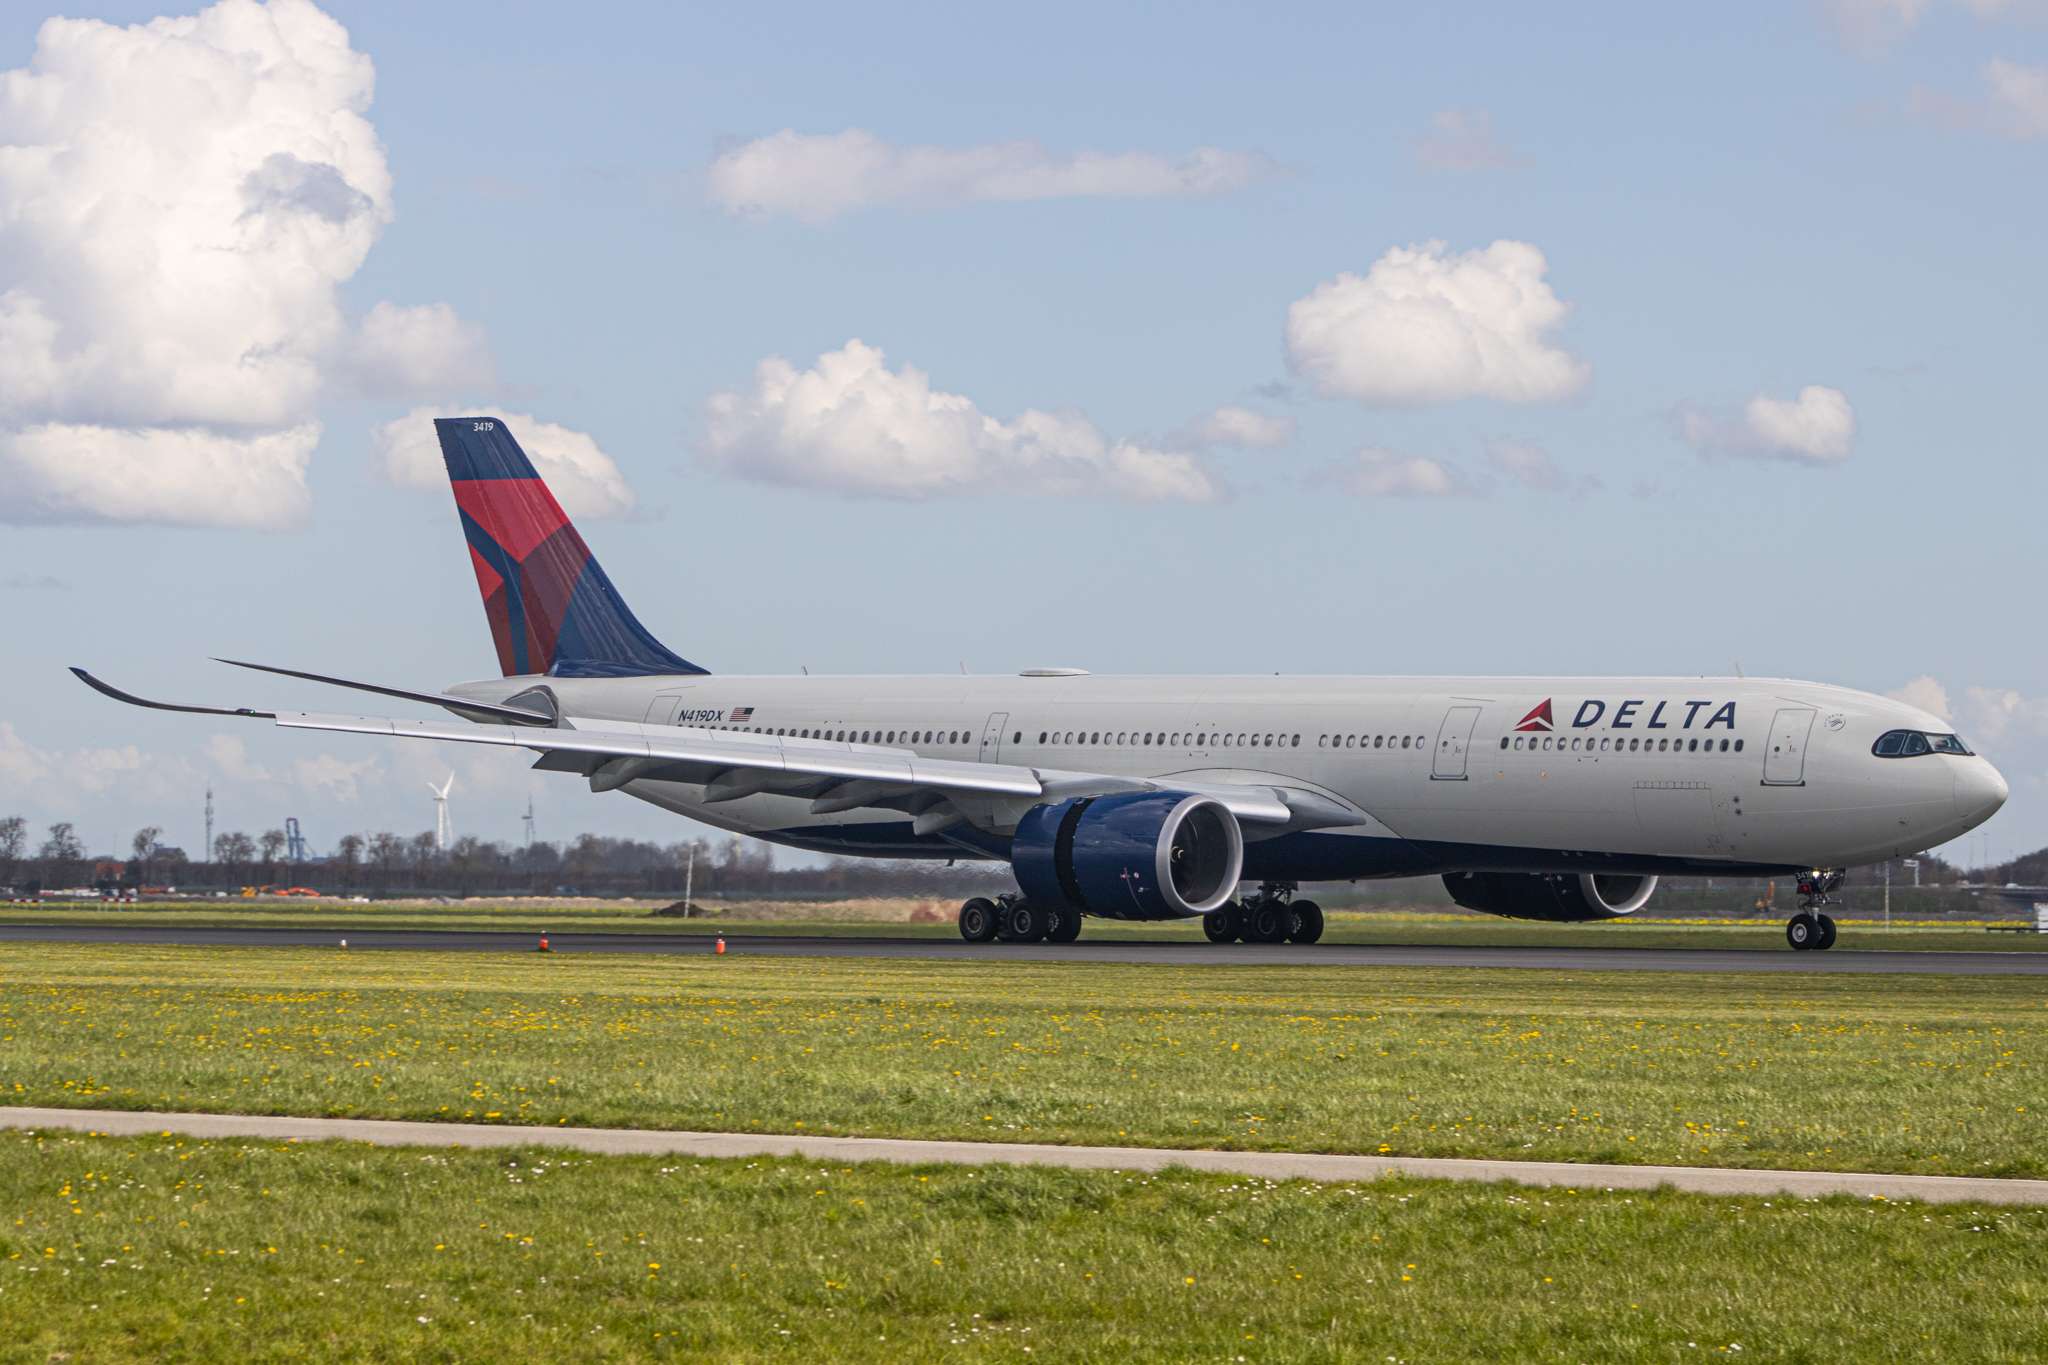 Following news over the weekend about Delta cancelling all services to Tel Aviv, Israel, more information has been released on their website about this.